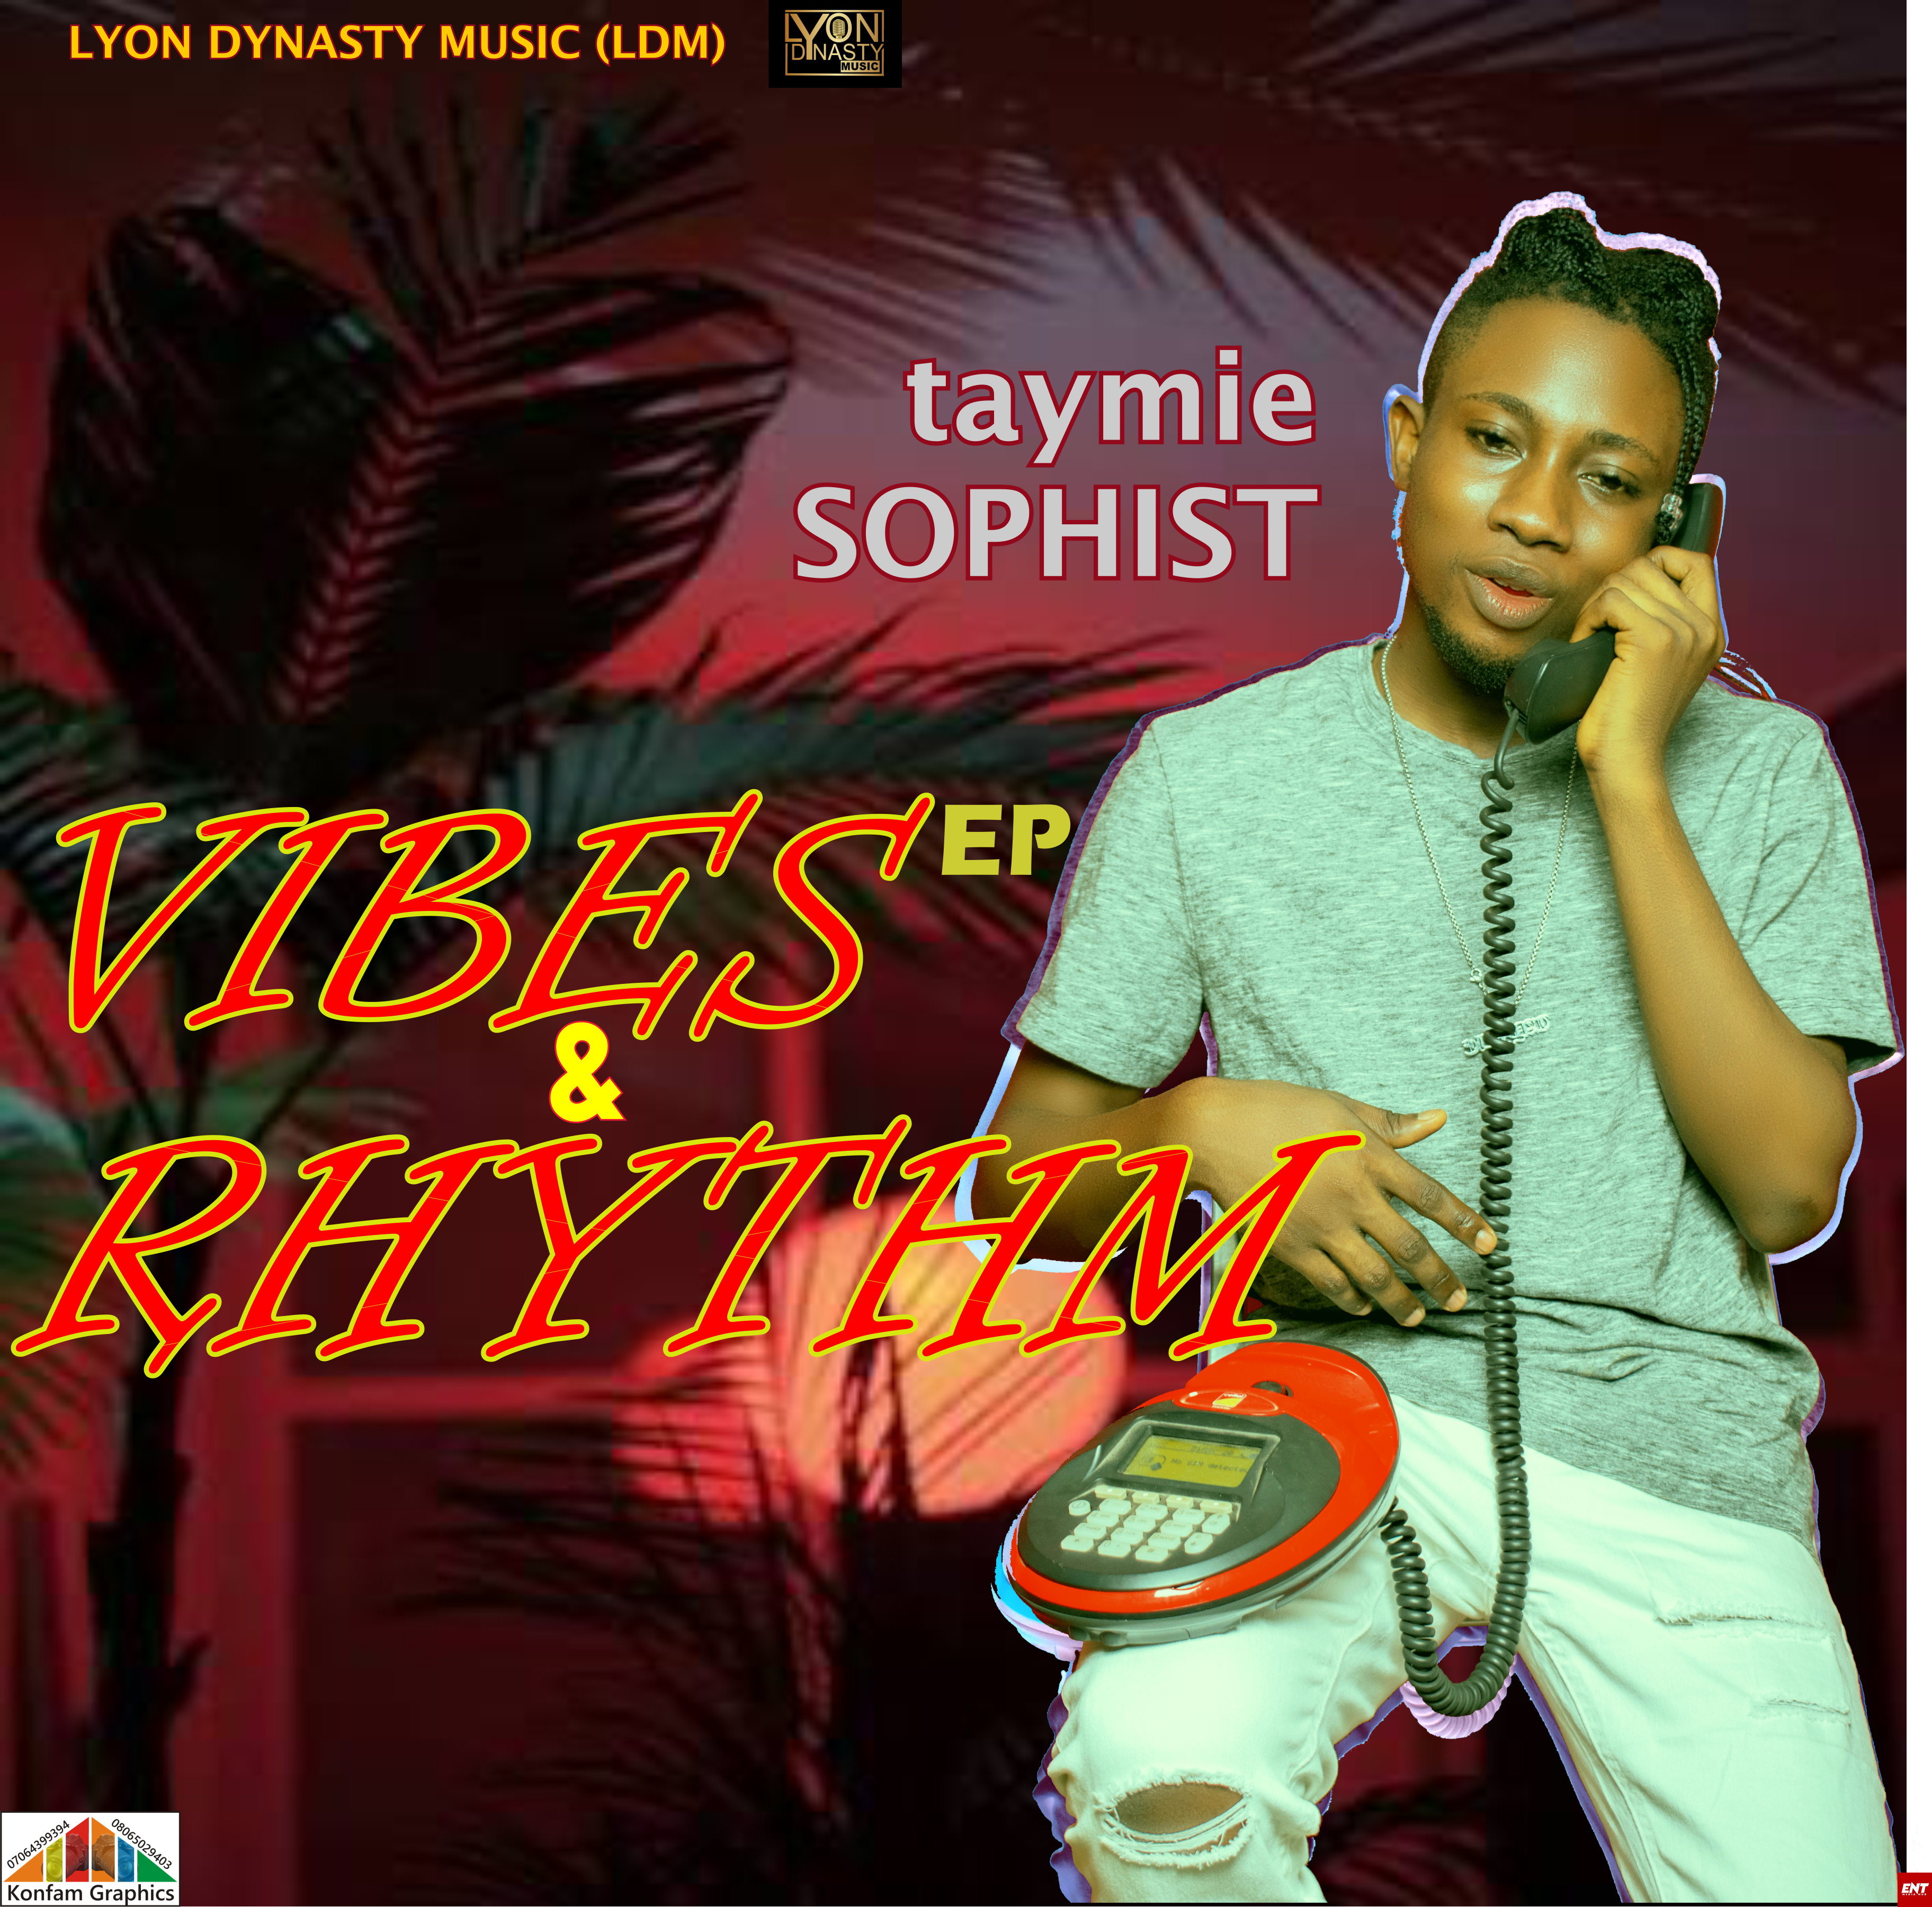 Taymie Sophist - Vibes and Rhythm Ep